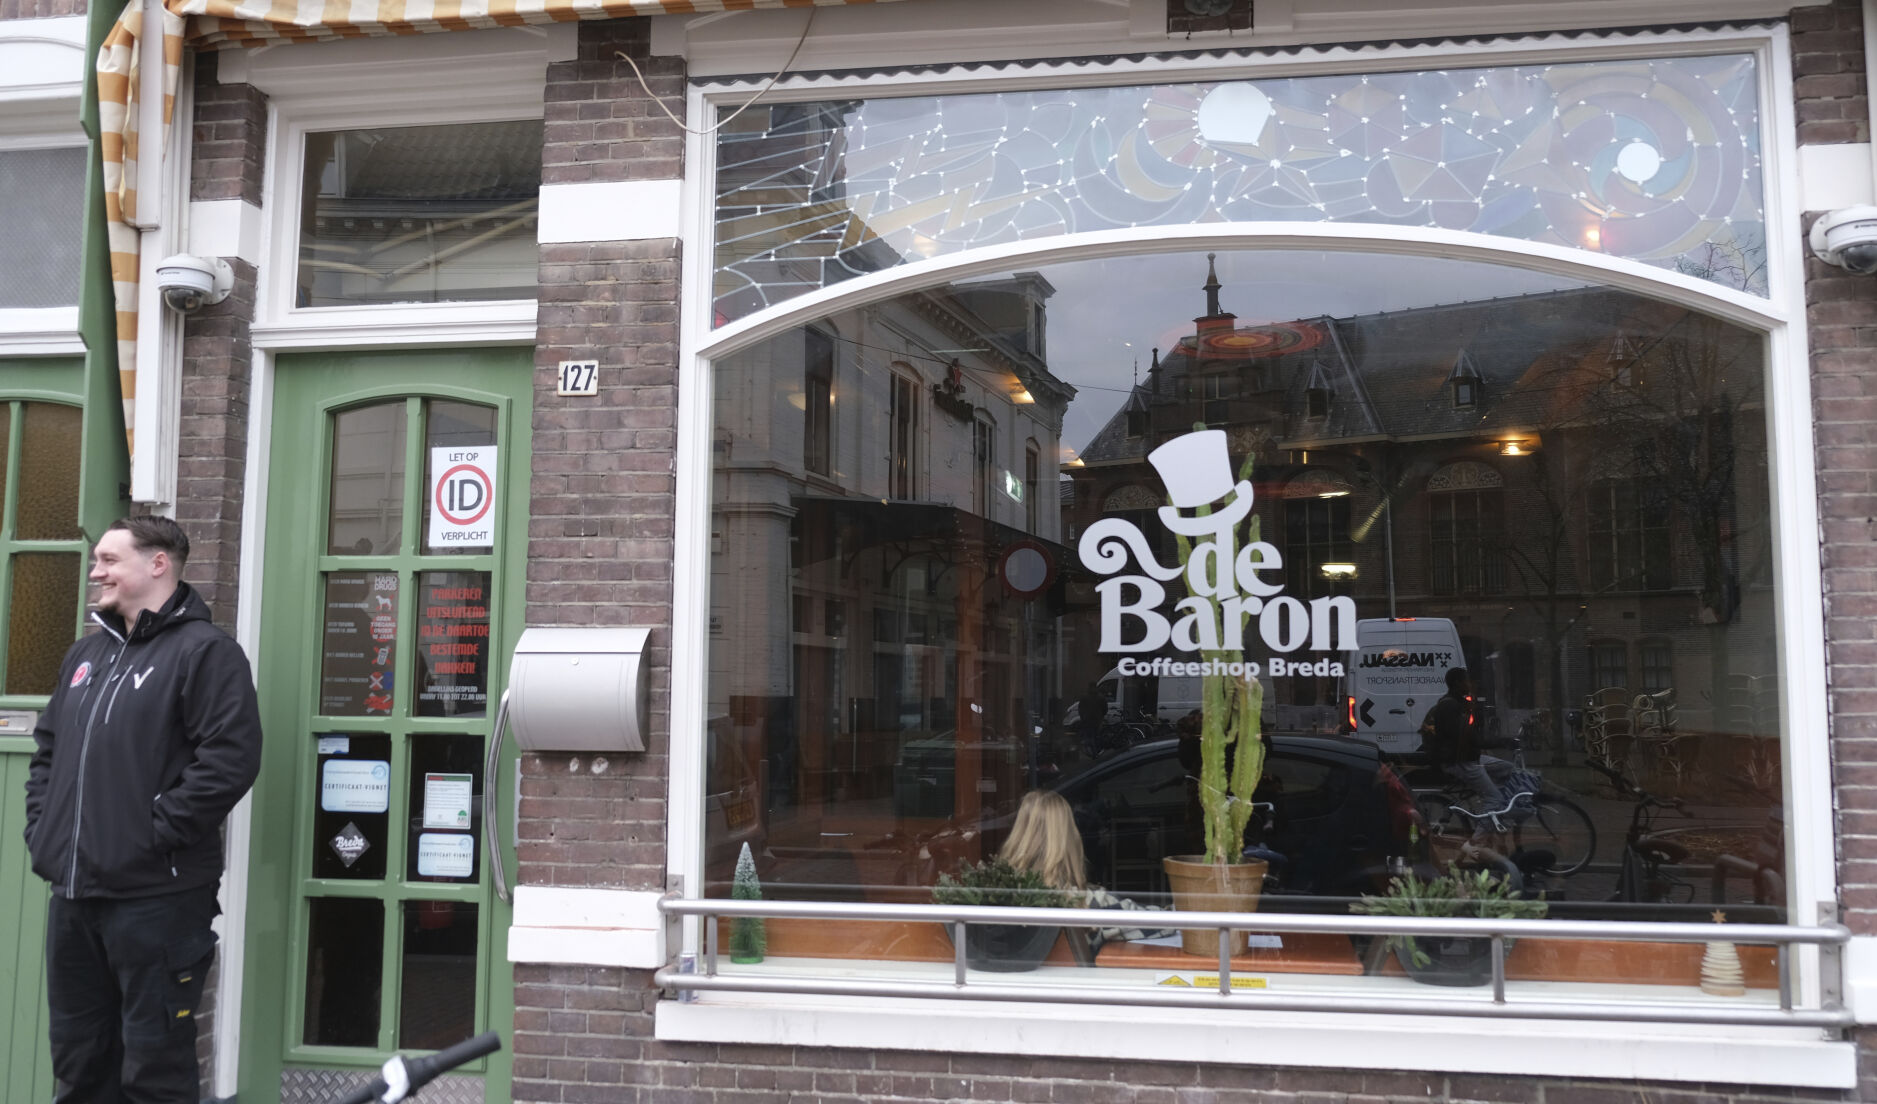 The entrance of coffeeshop De Baron in the southern Dutch city of Breda, after Health Minister Ernst Kuipers visited to launch a new policy on pot growing in two Dutch cities, Friday, Dec. 15, 2023. A paradox at the heart of the Netherlands